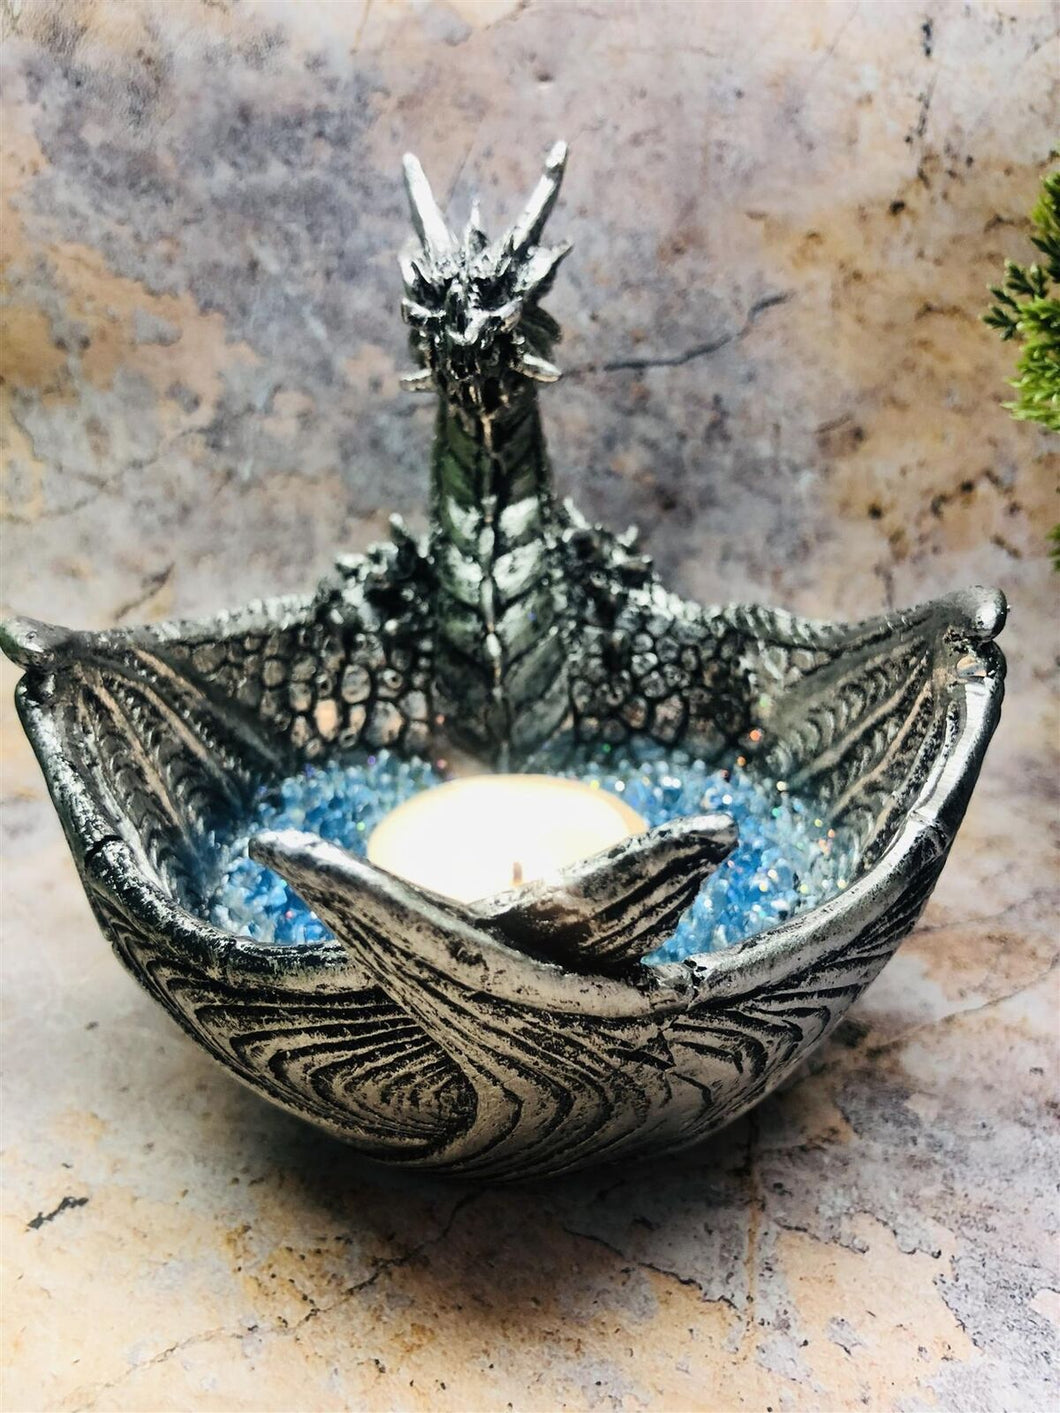 Silver Dragon Candle Holder Gothic Home Decor Figurine